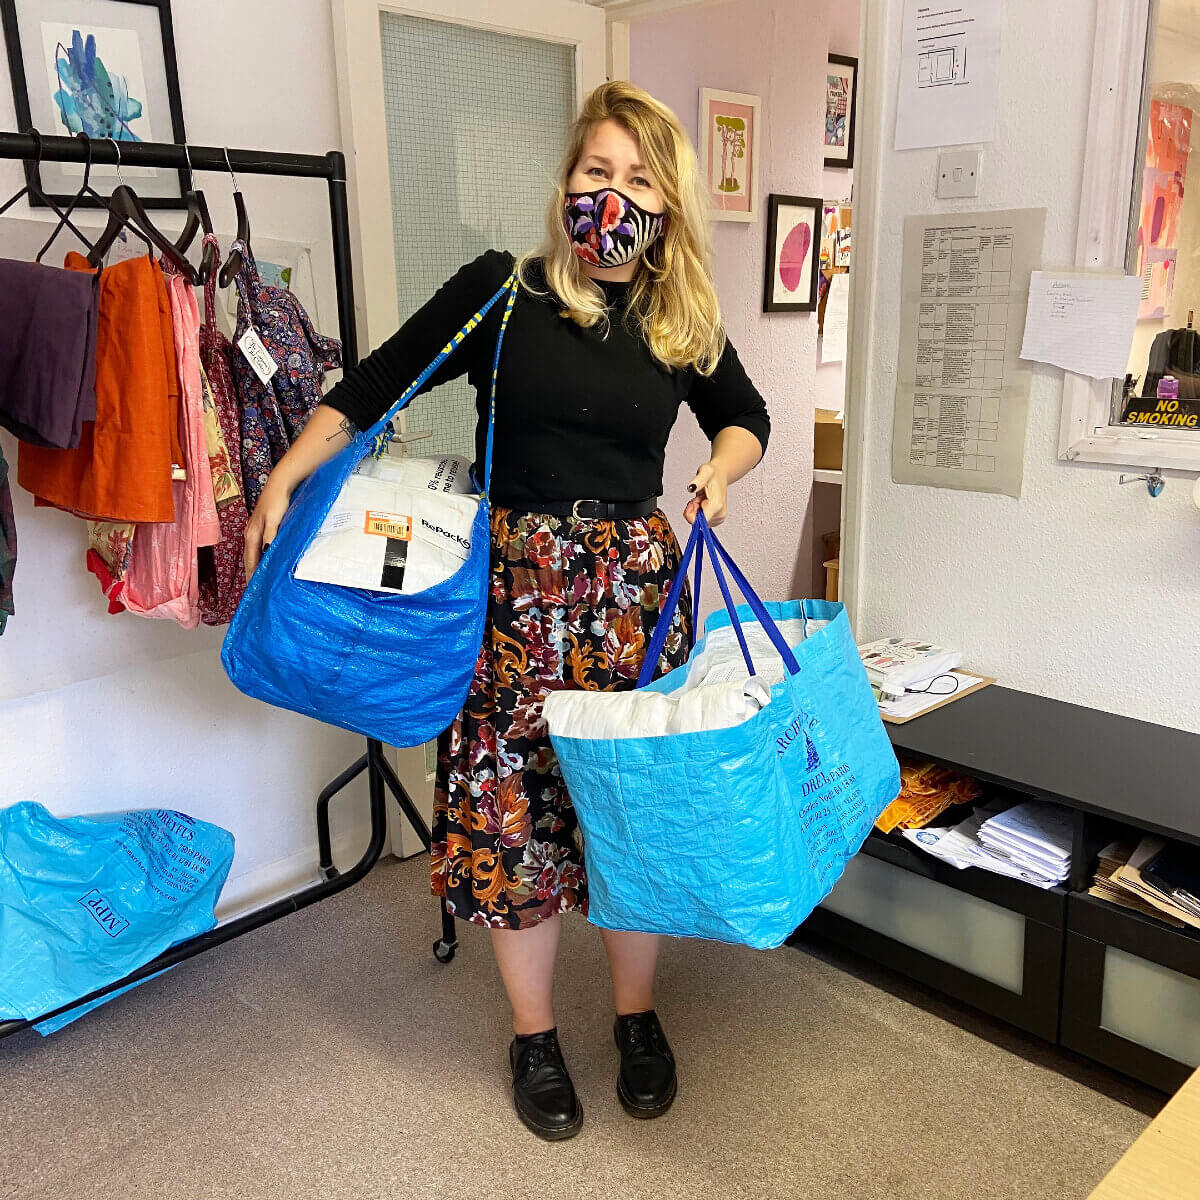 Anna, an Emperor’s Old Clothes employee, on her way out the door with a week’s worth of postage to ship out ethical clothing. 